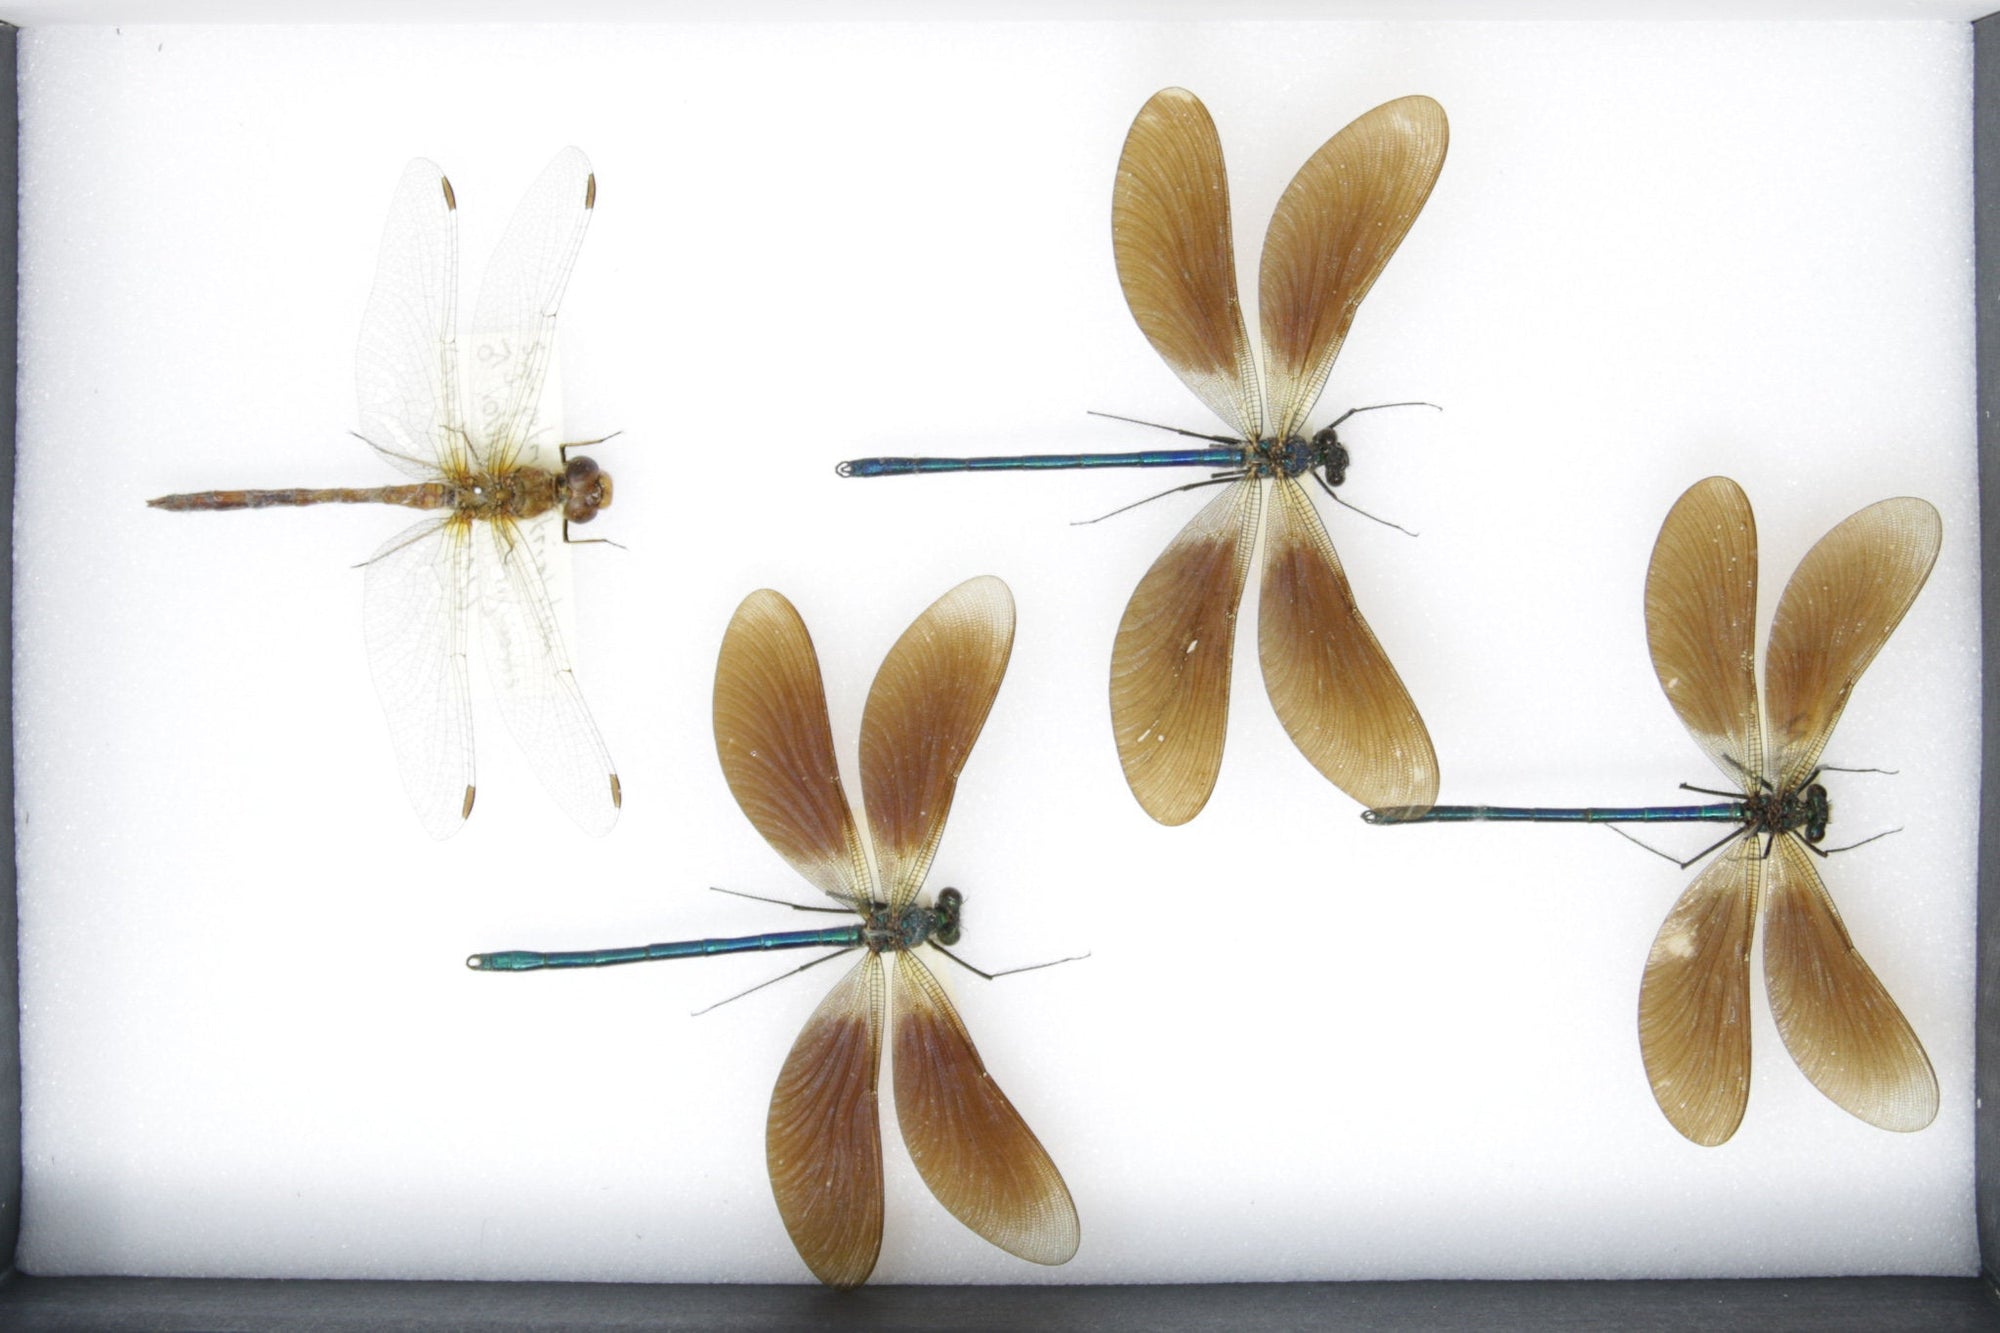 Dragonflies & Damselflies Entomology Starter Collection | Pinned Odonata Insect Specimens | Presented in a Gift Box